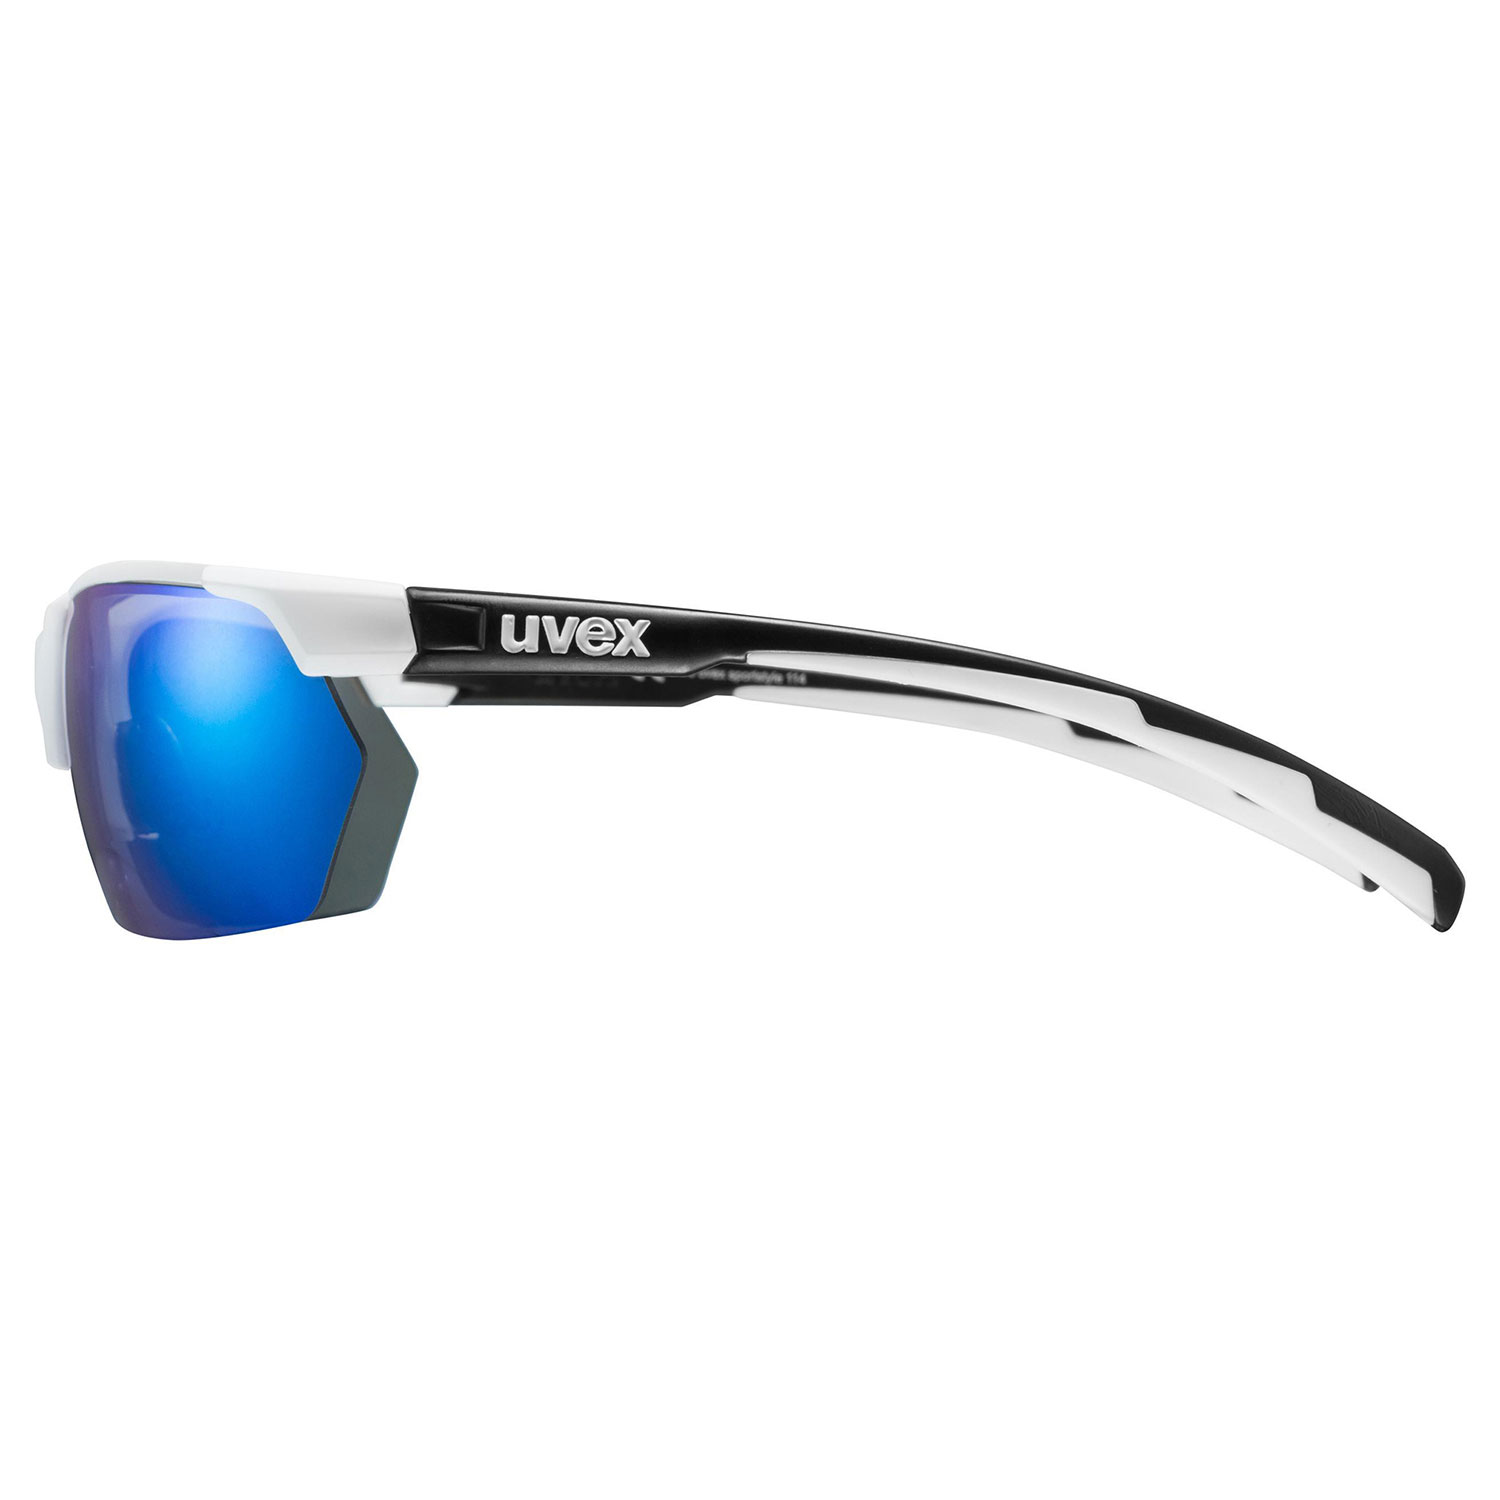 UVEX Sportstyle 114 Whi.bl.mat/mir.blue (s5309398216)